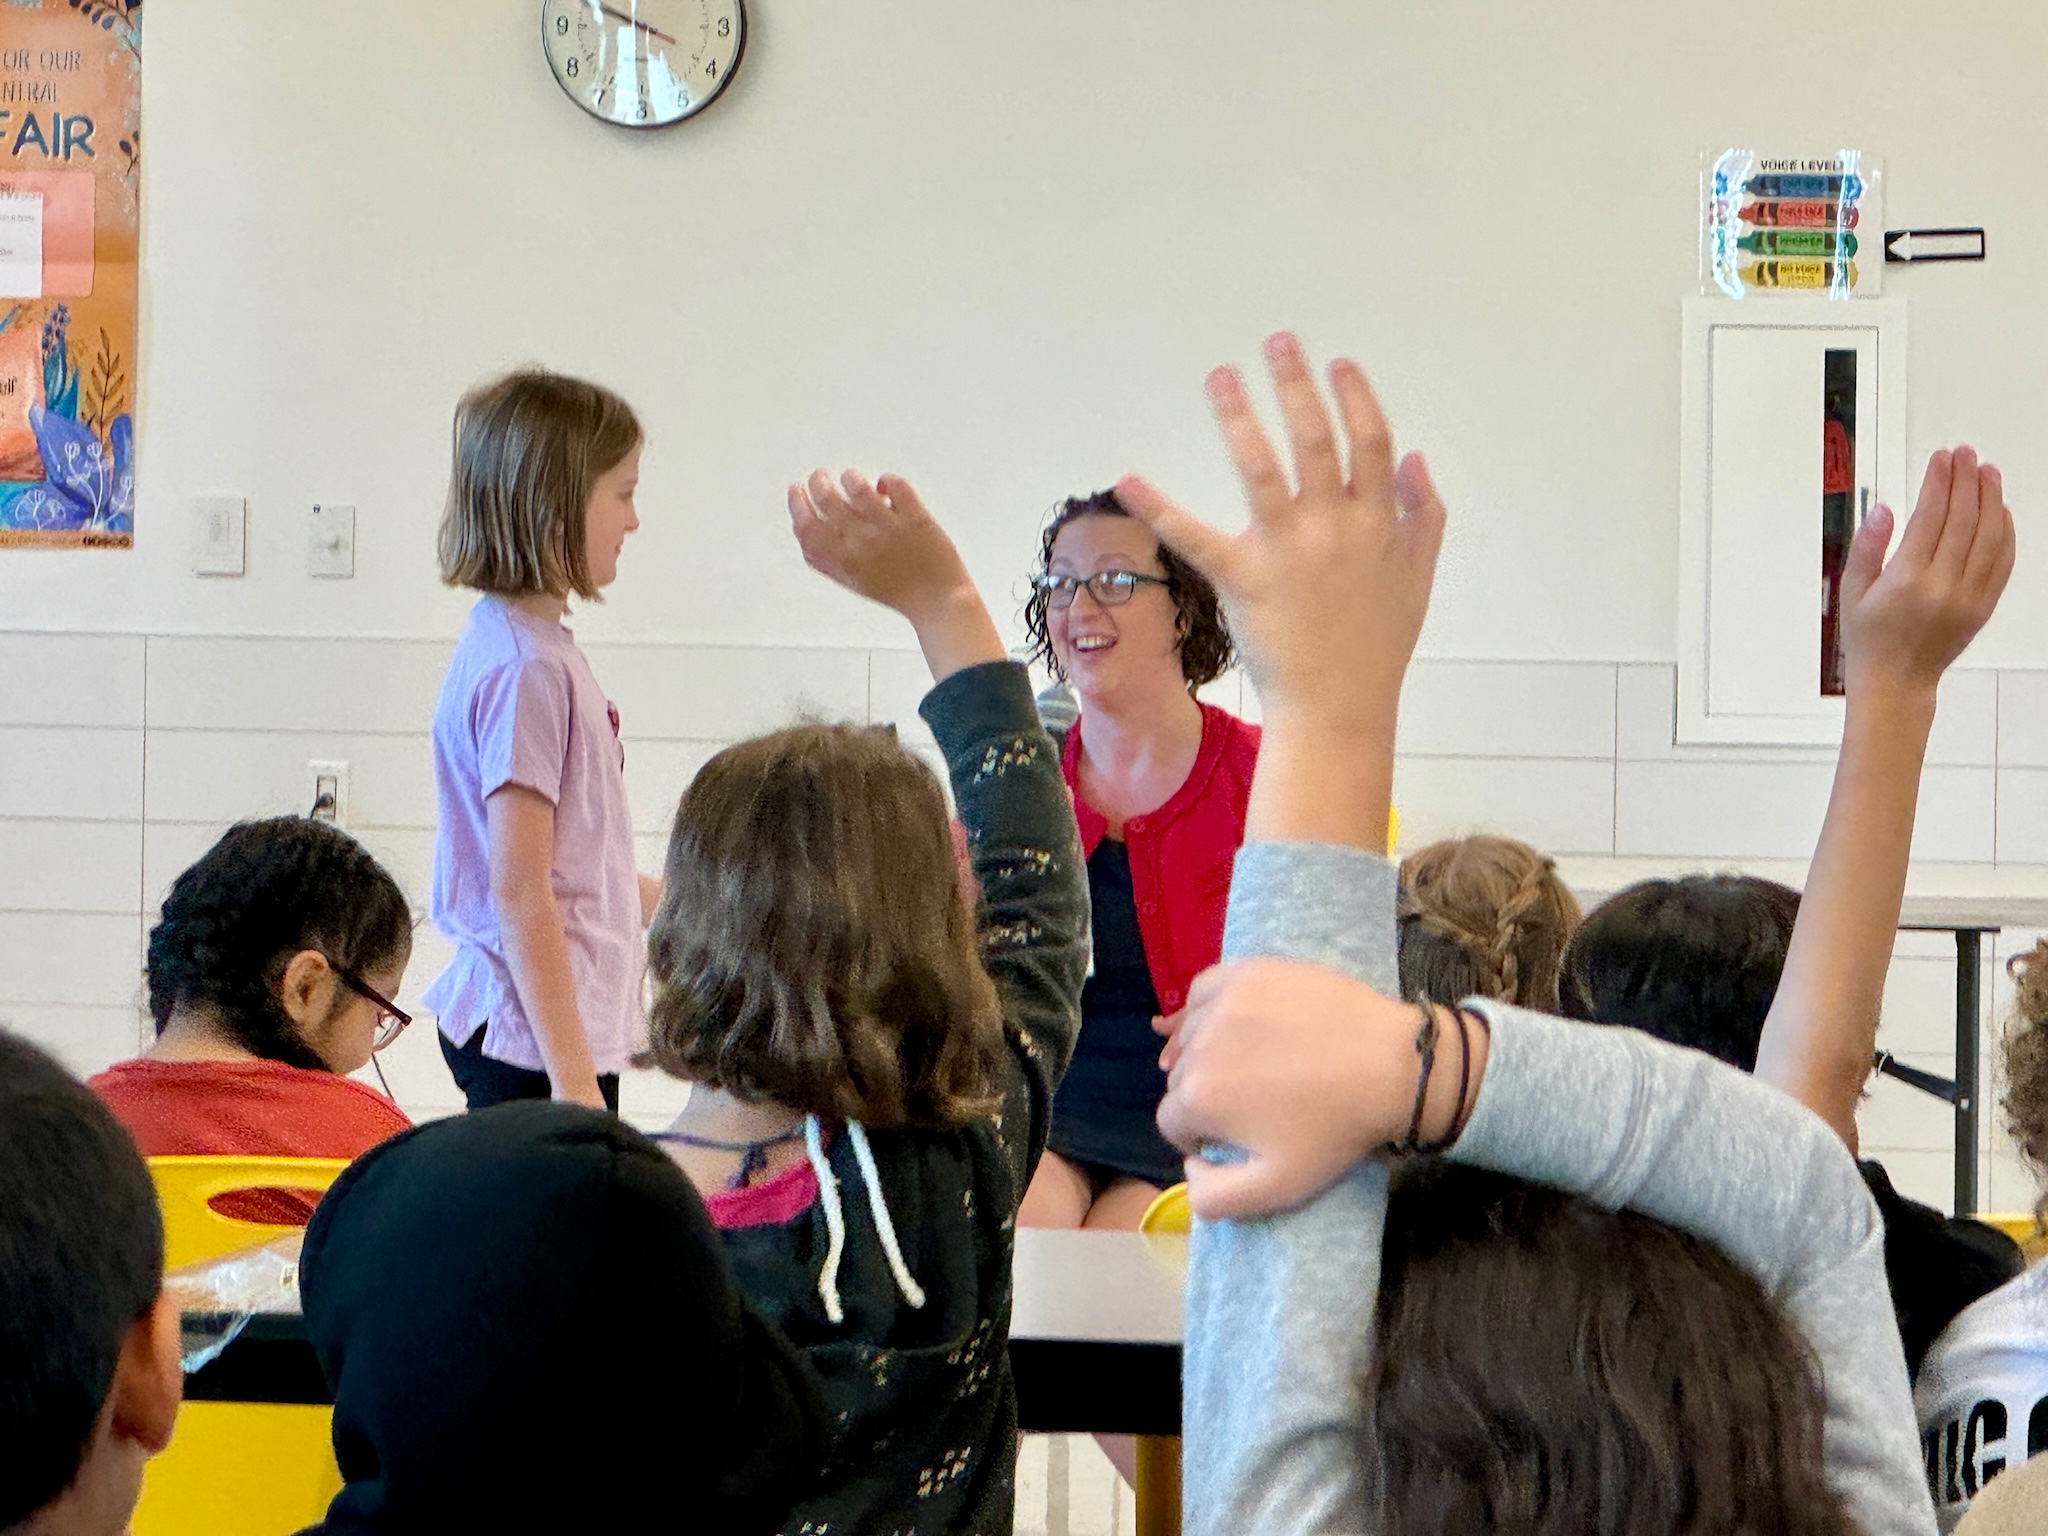 Backs of kids heads with their hands raised while seated in cafeteria seats. Councilmember Nadeau is visible smiling, speaking to a young student standing in front of her.